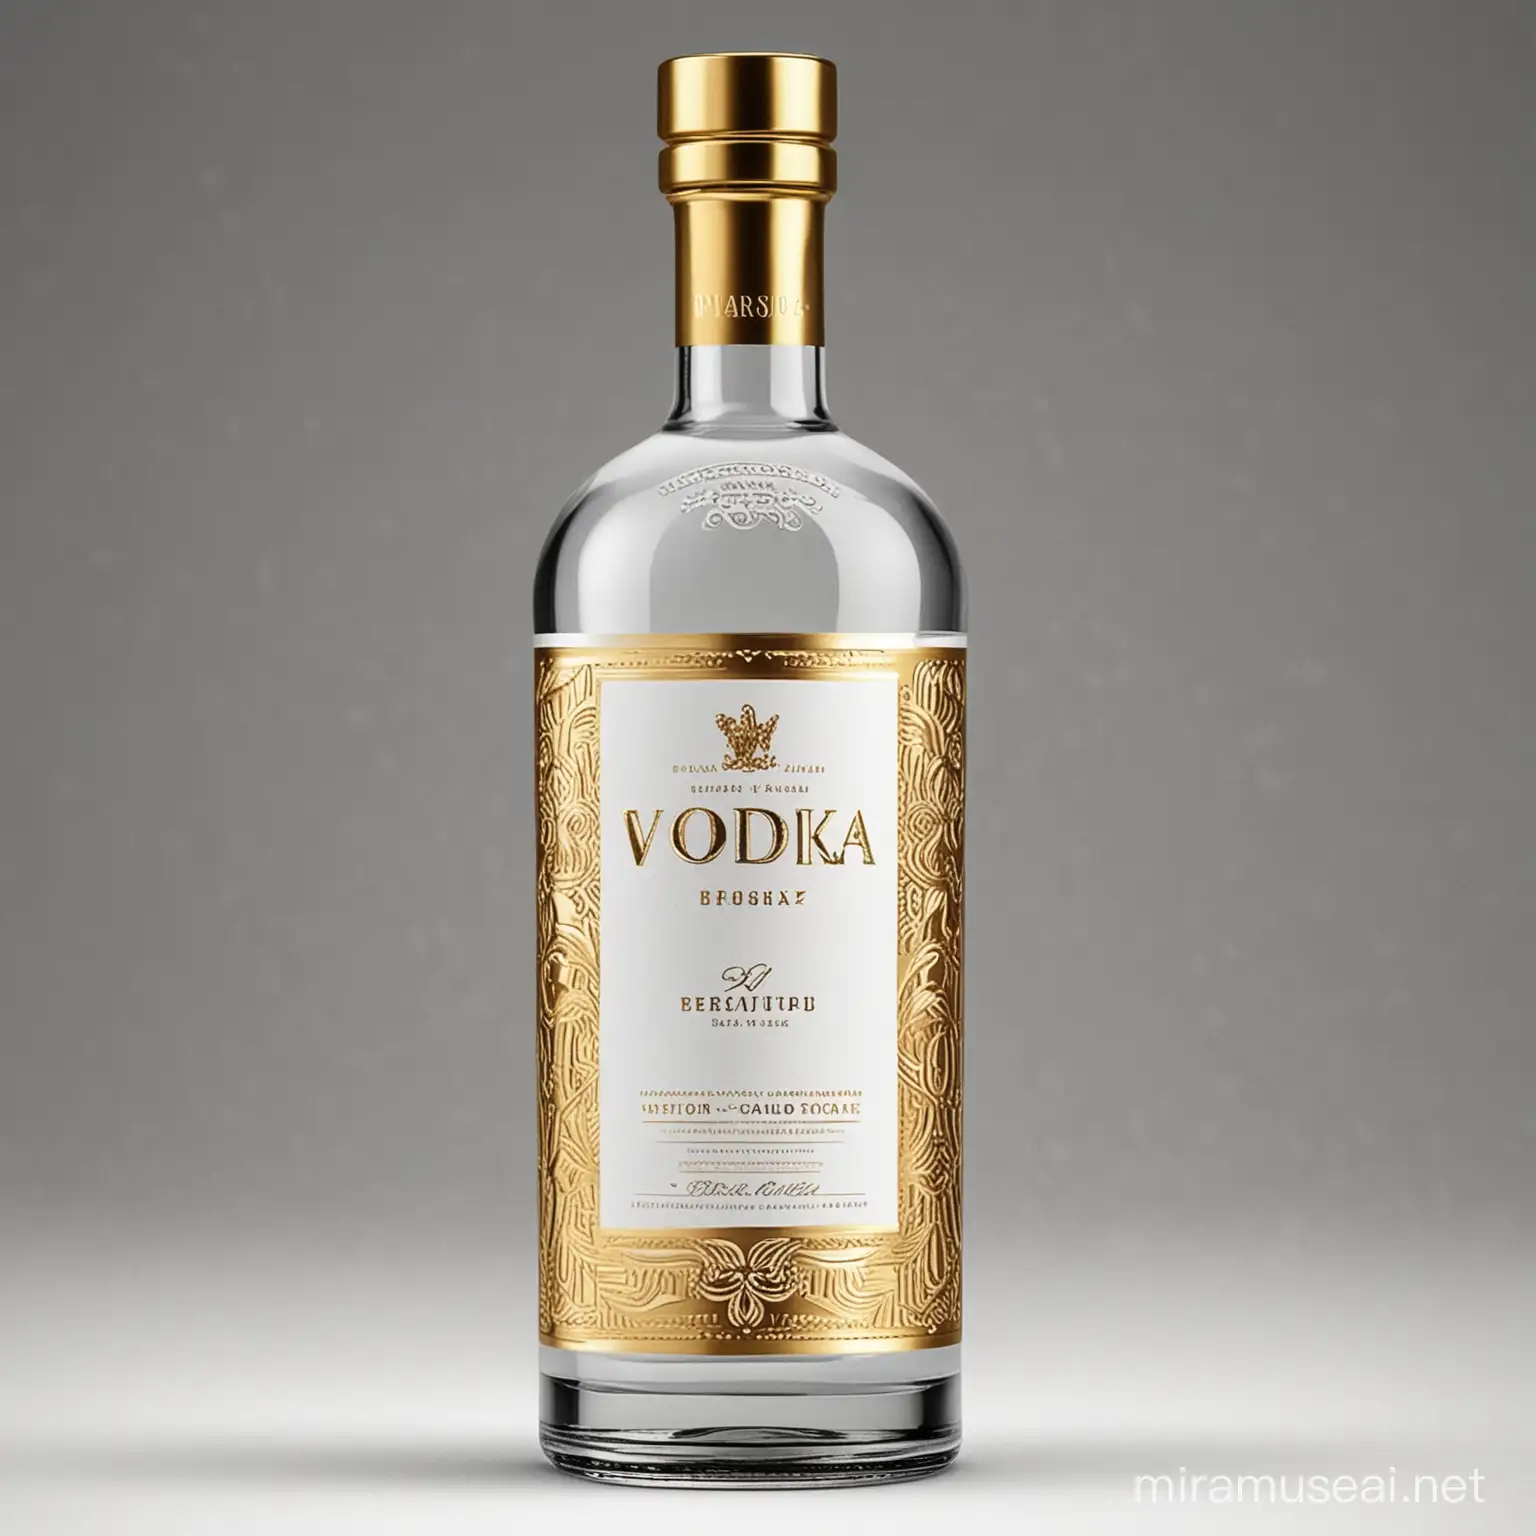 Luxurious Vodka Label Design Featuring Beautiful Gold Accents